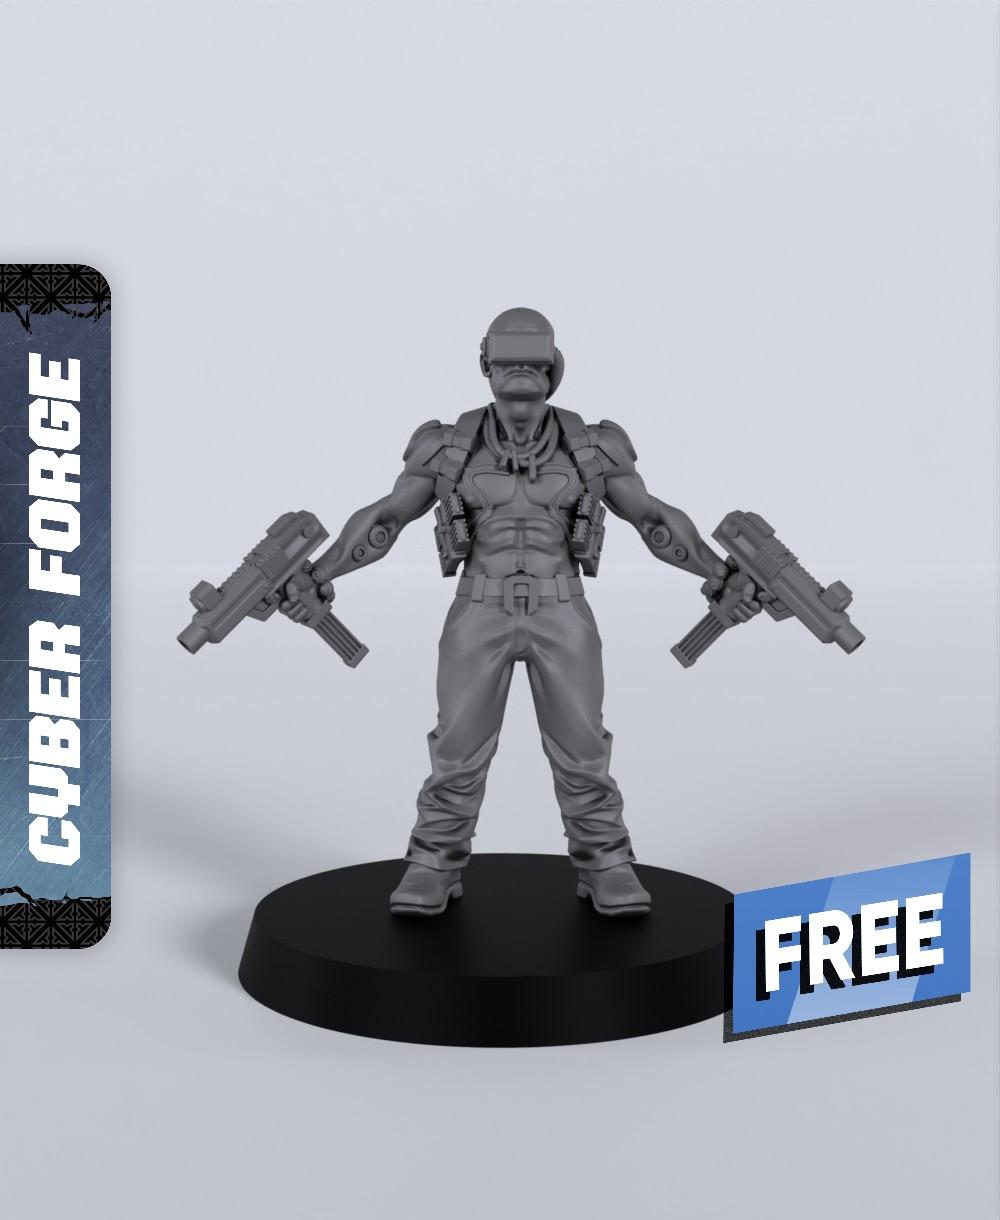 Cube - With Free Cyberpunk Dragon Warhammer - 40k Sci-Fi Gift Ideas for RPG and Wargamers 3d model